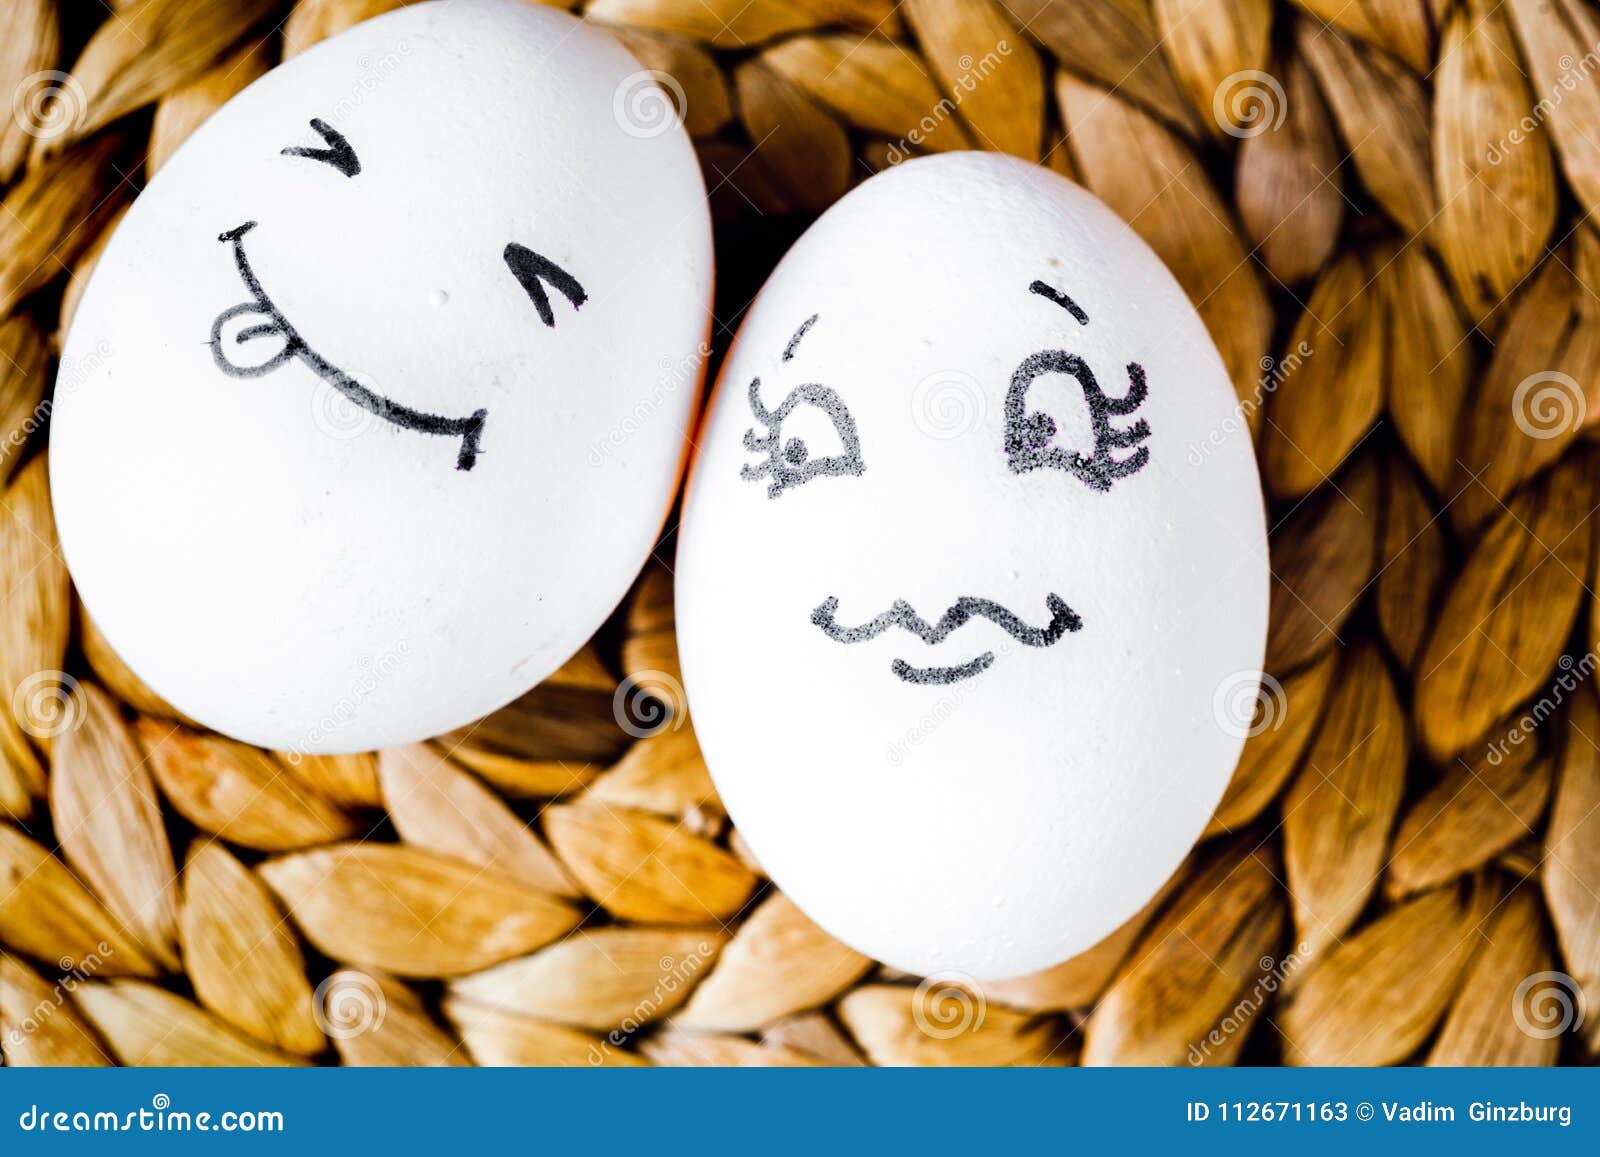 concept human relationships and emotions eggs - flirtation